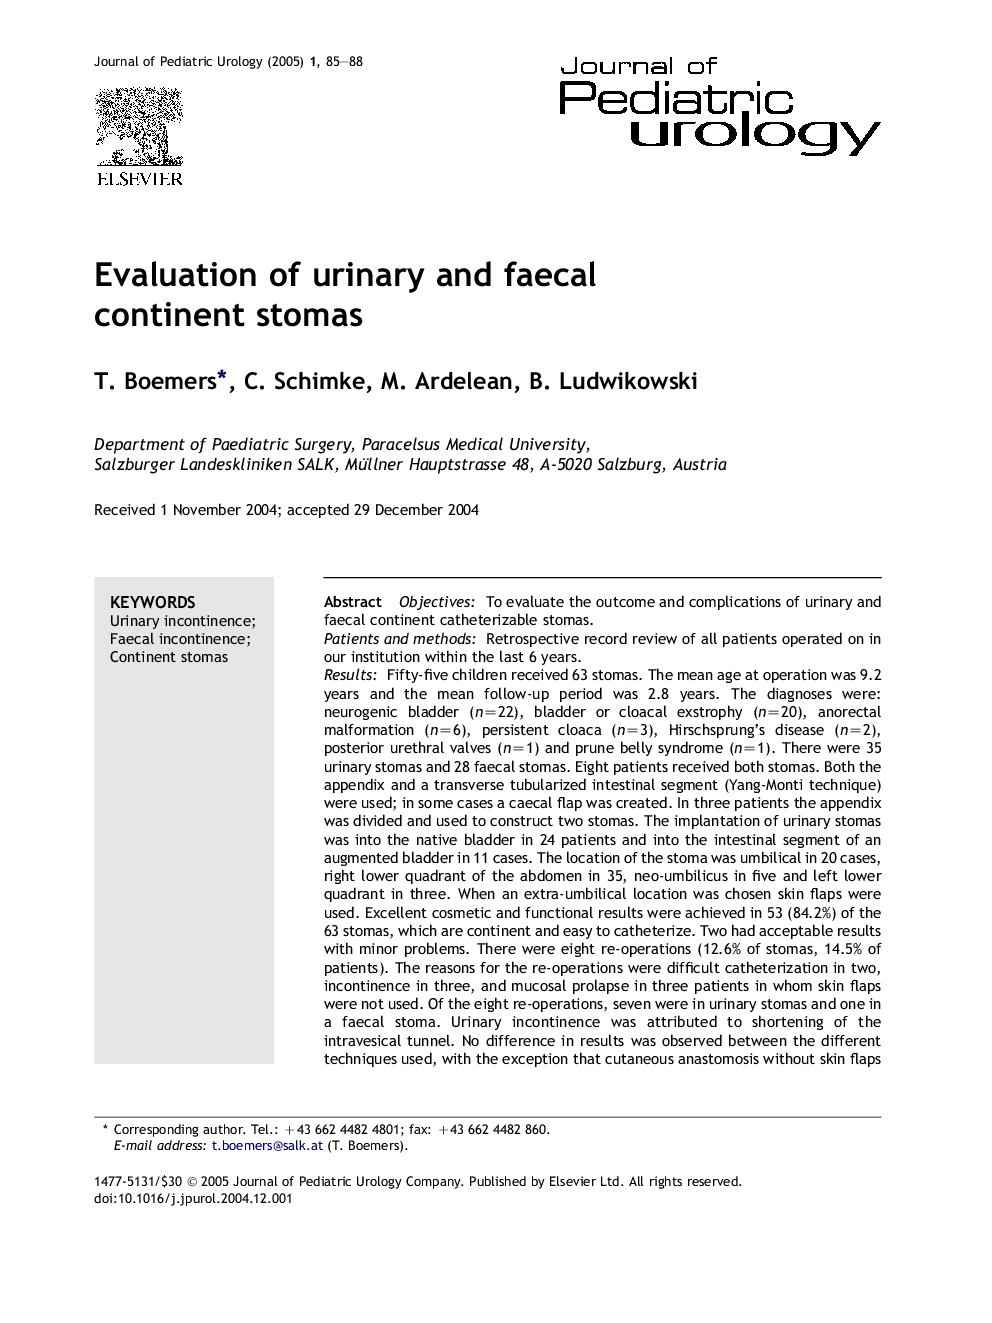 Evaluation of urinary and faecal continent stomas